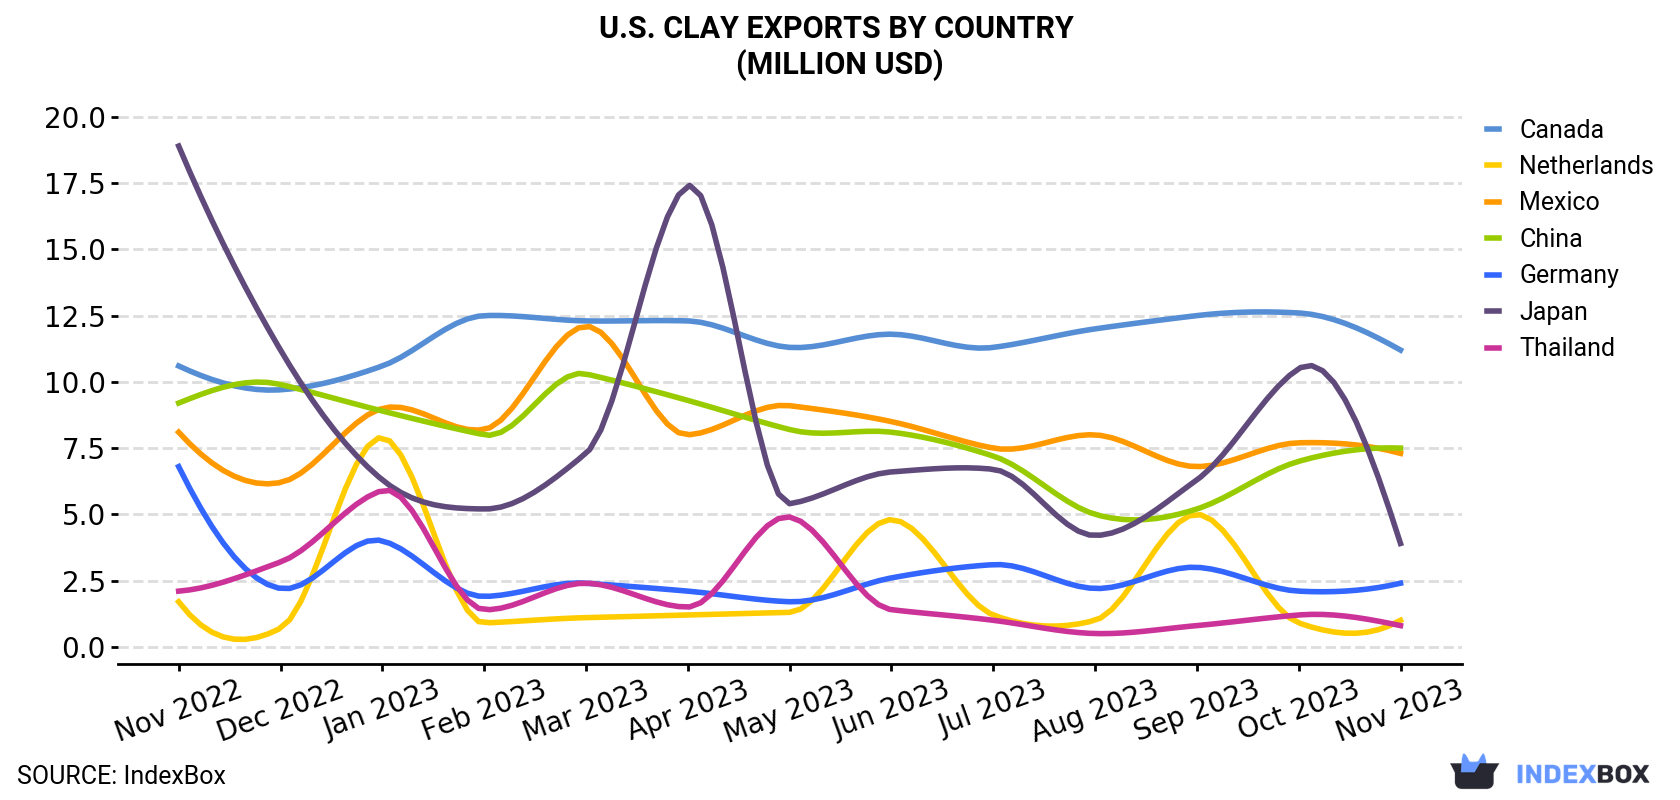 U.S. Clay Exports By Country (Million USD)